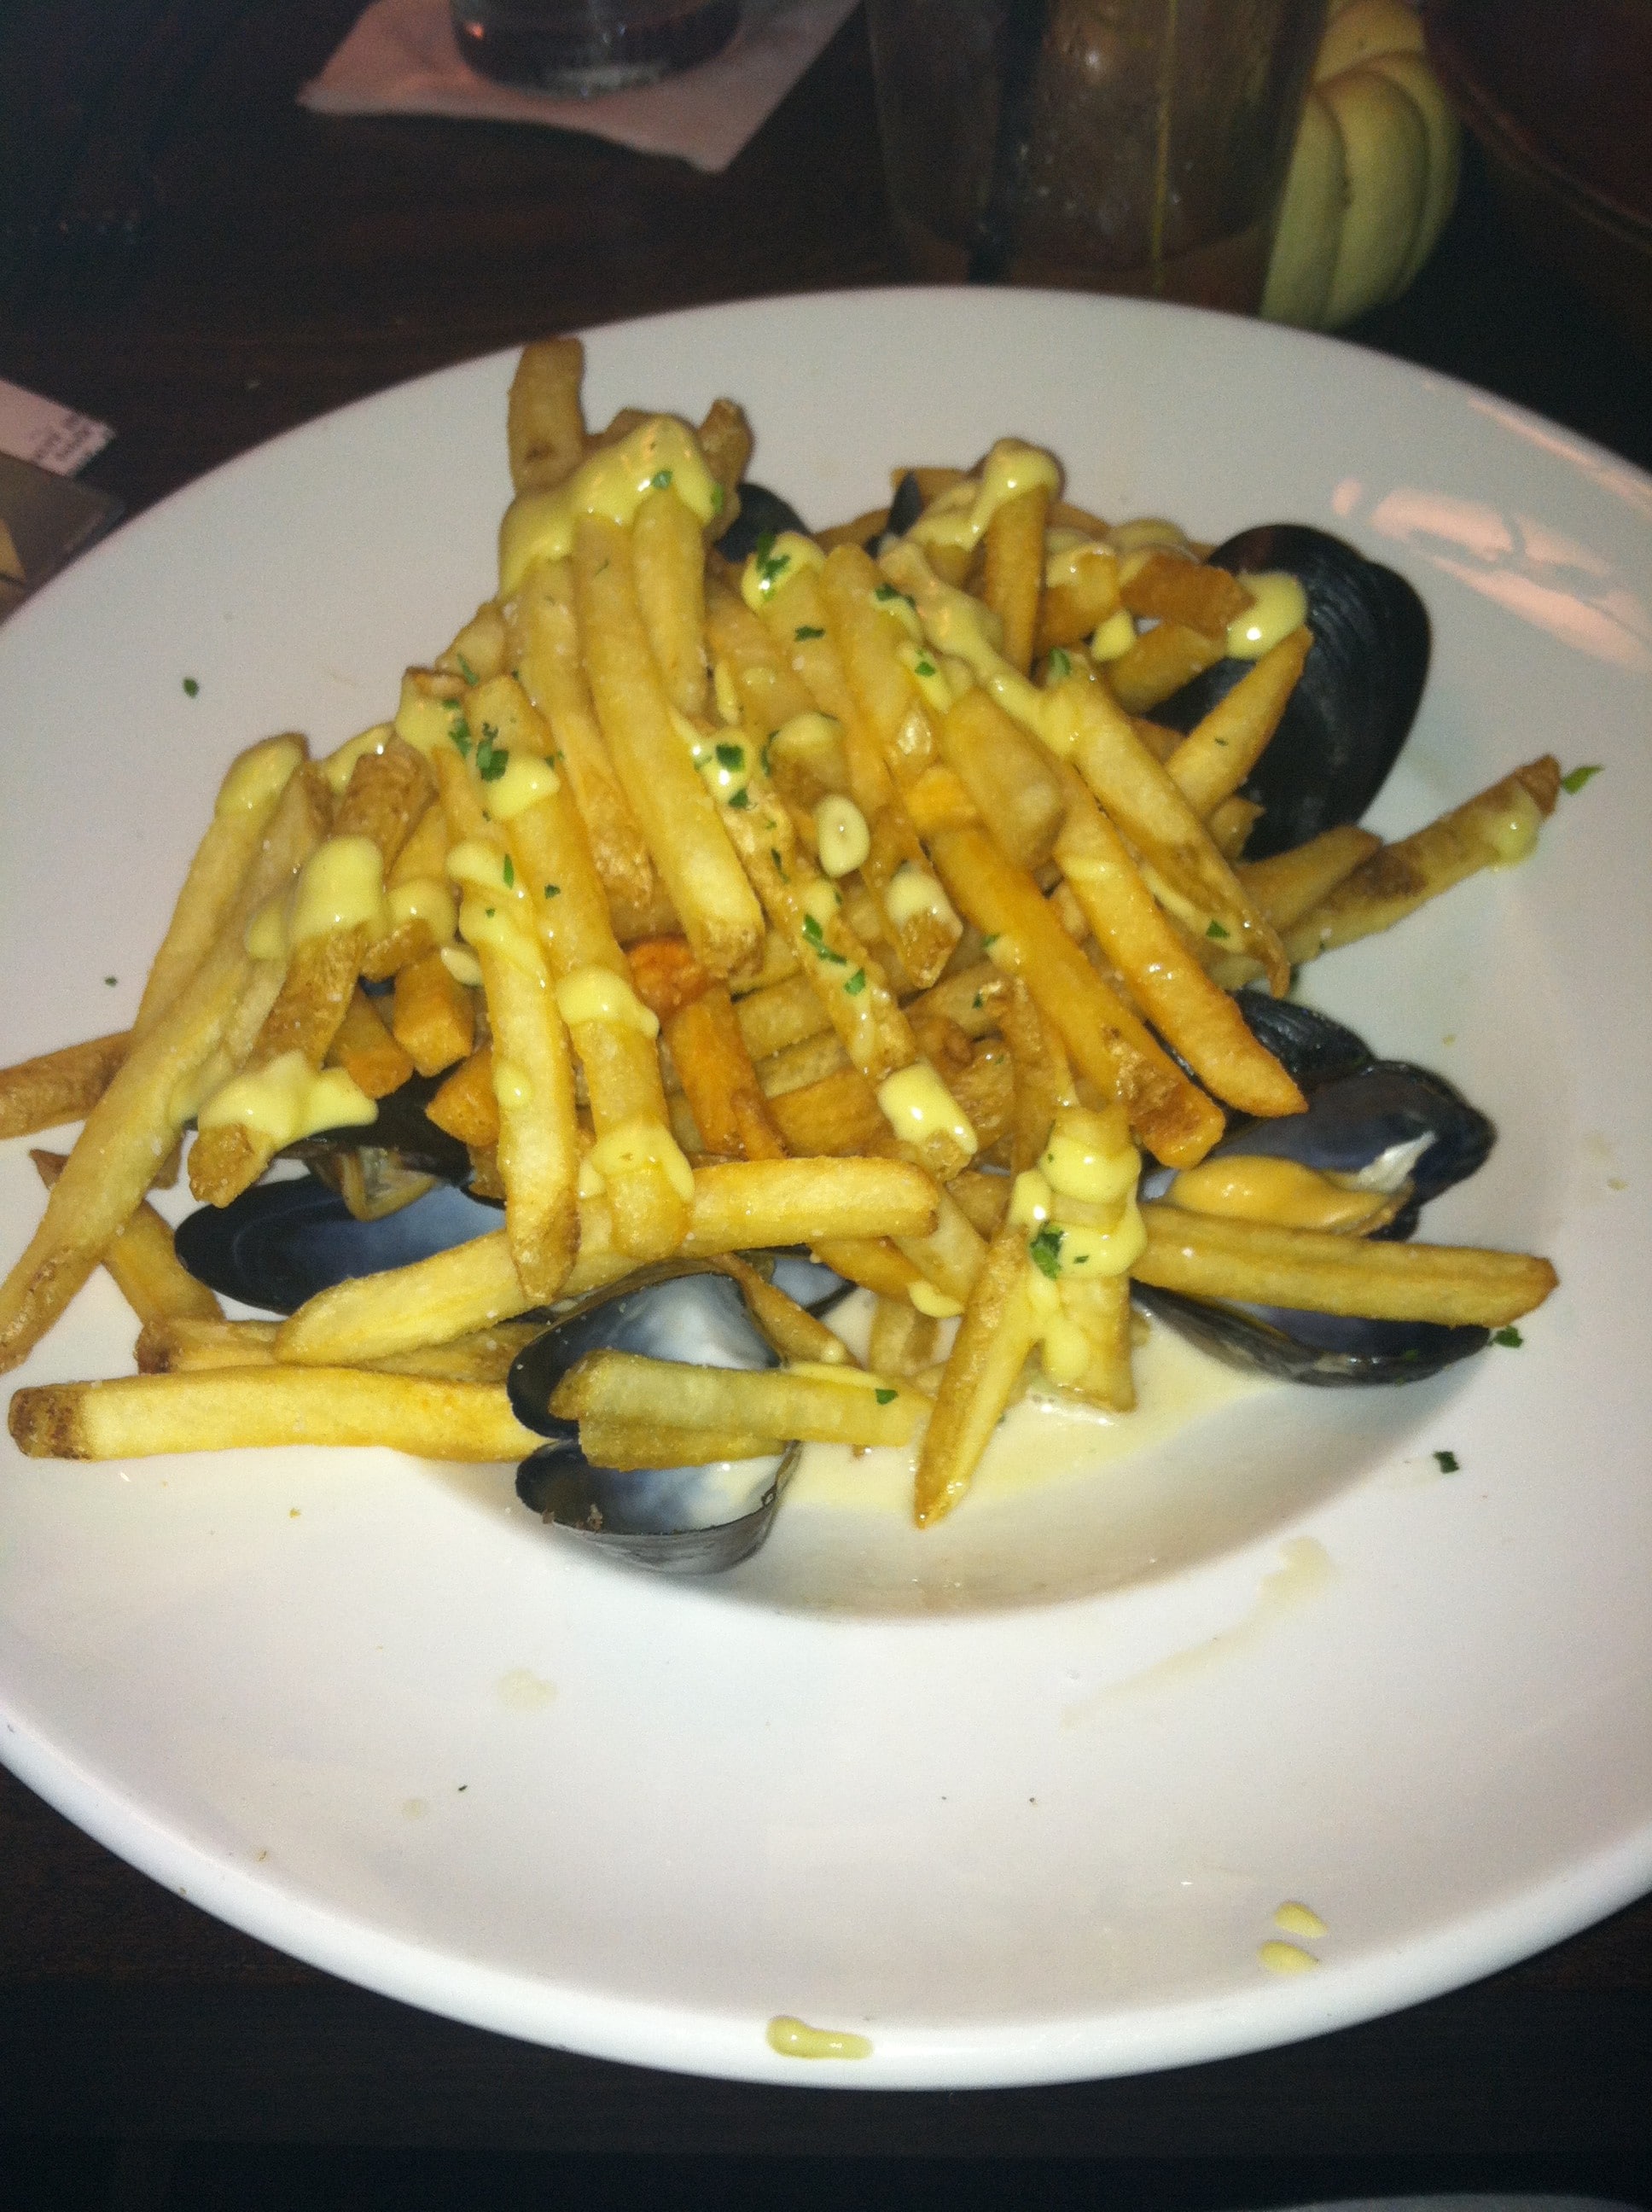 A delicious dish at Newport's Oyster Bar, one of the many restaurants participating in Restaurant Week.